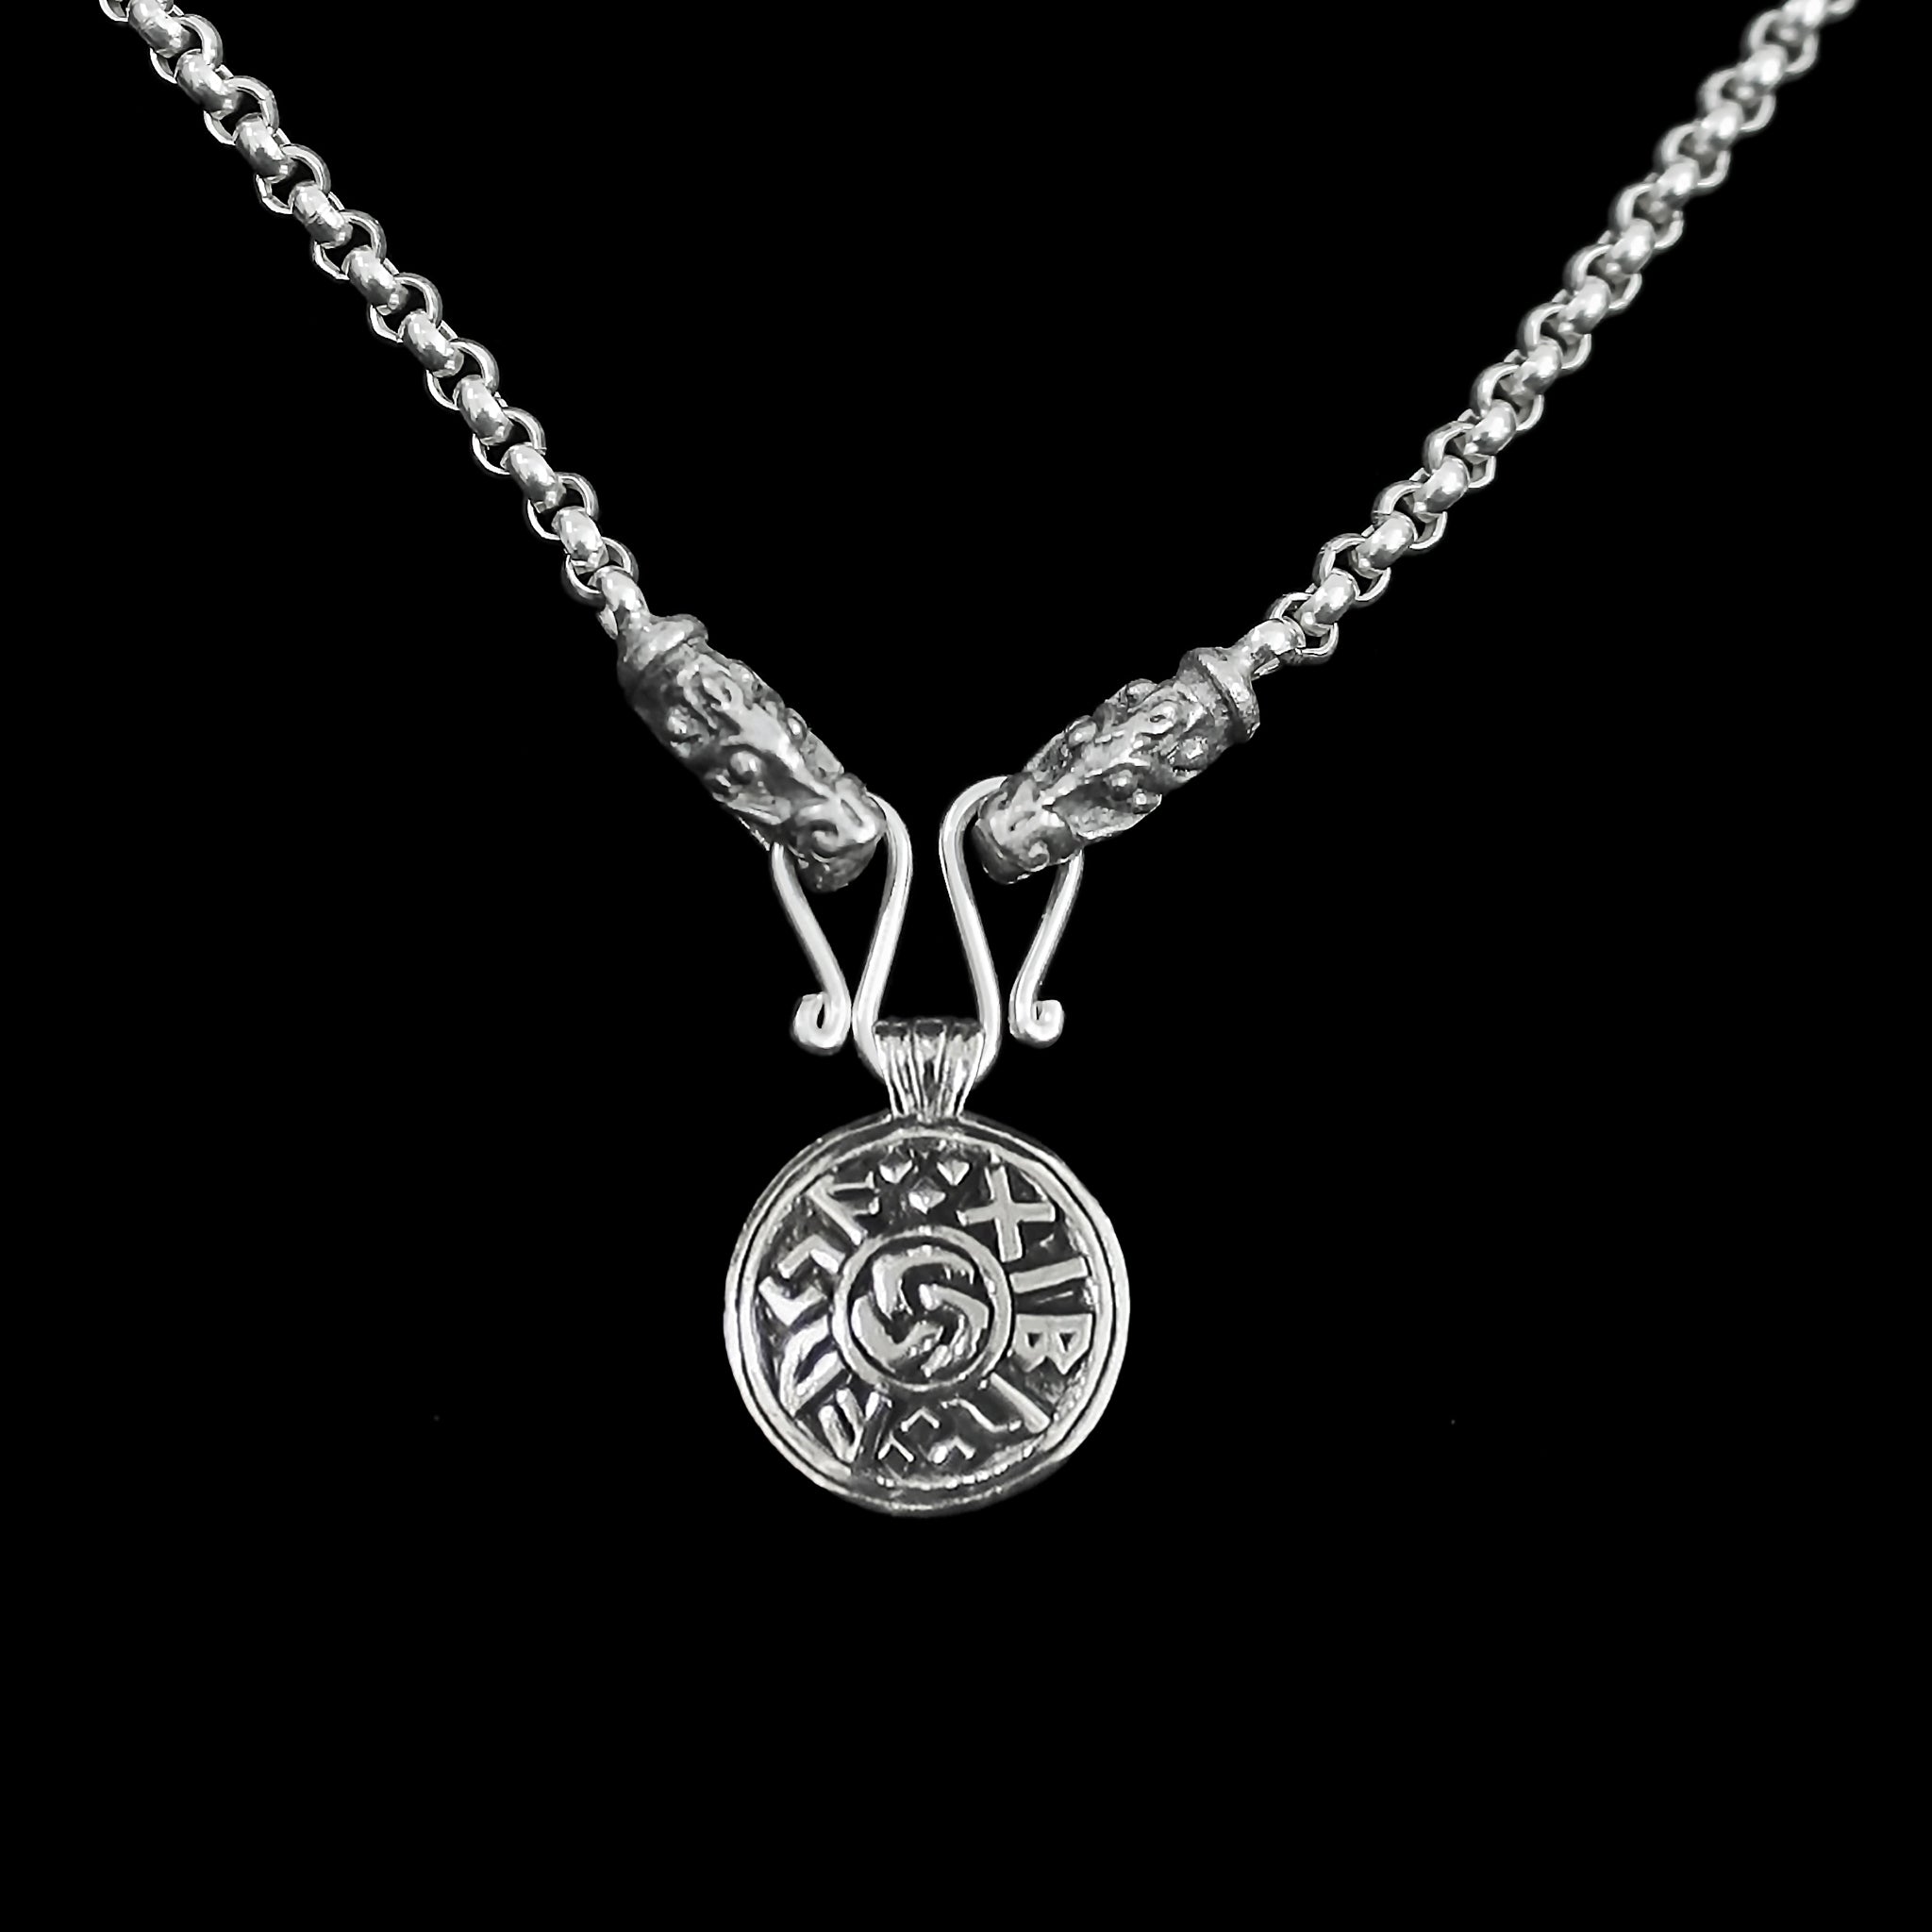 Slim Silver Anchor Chain Pendant Necklace with Gotland Dragon Heads with Viking Luck Pendant